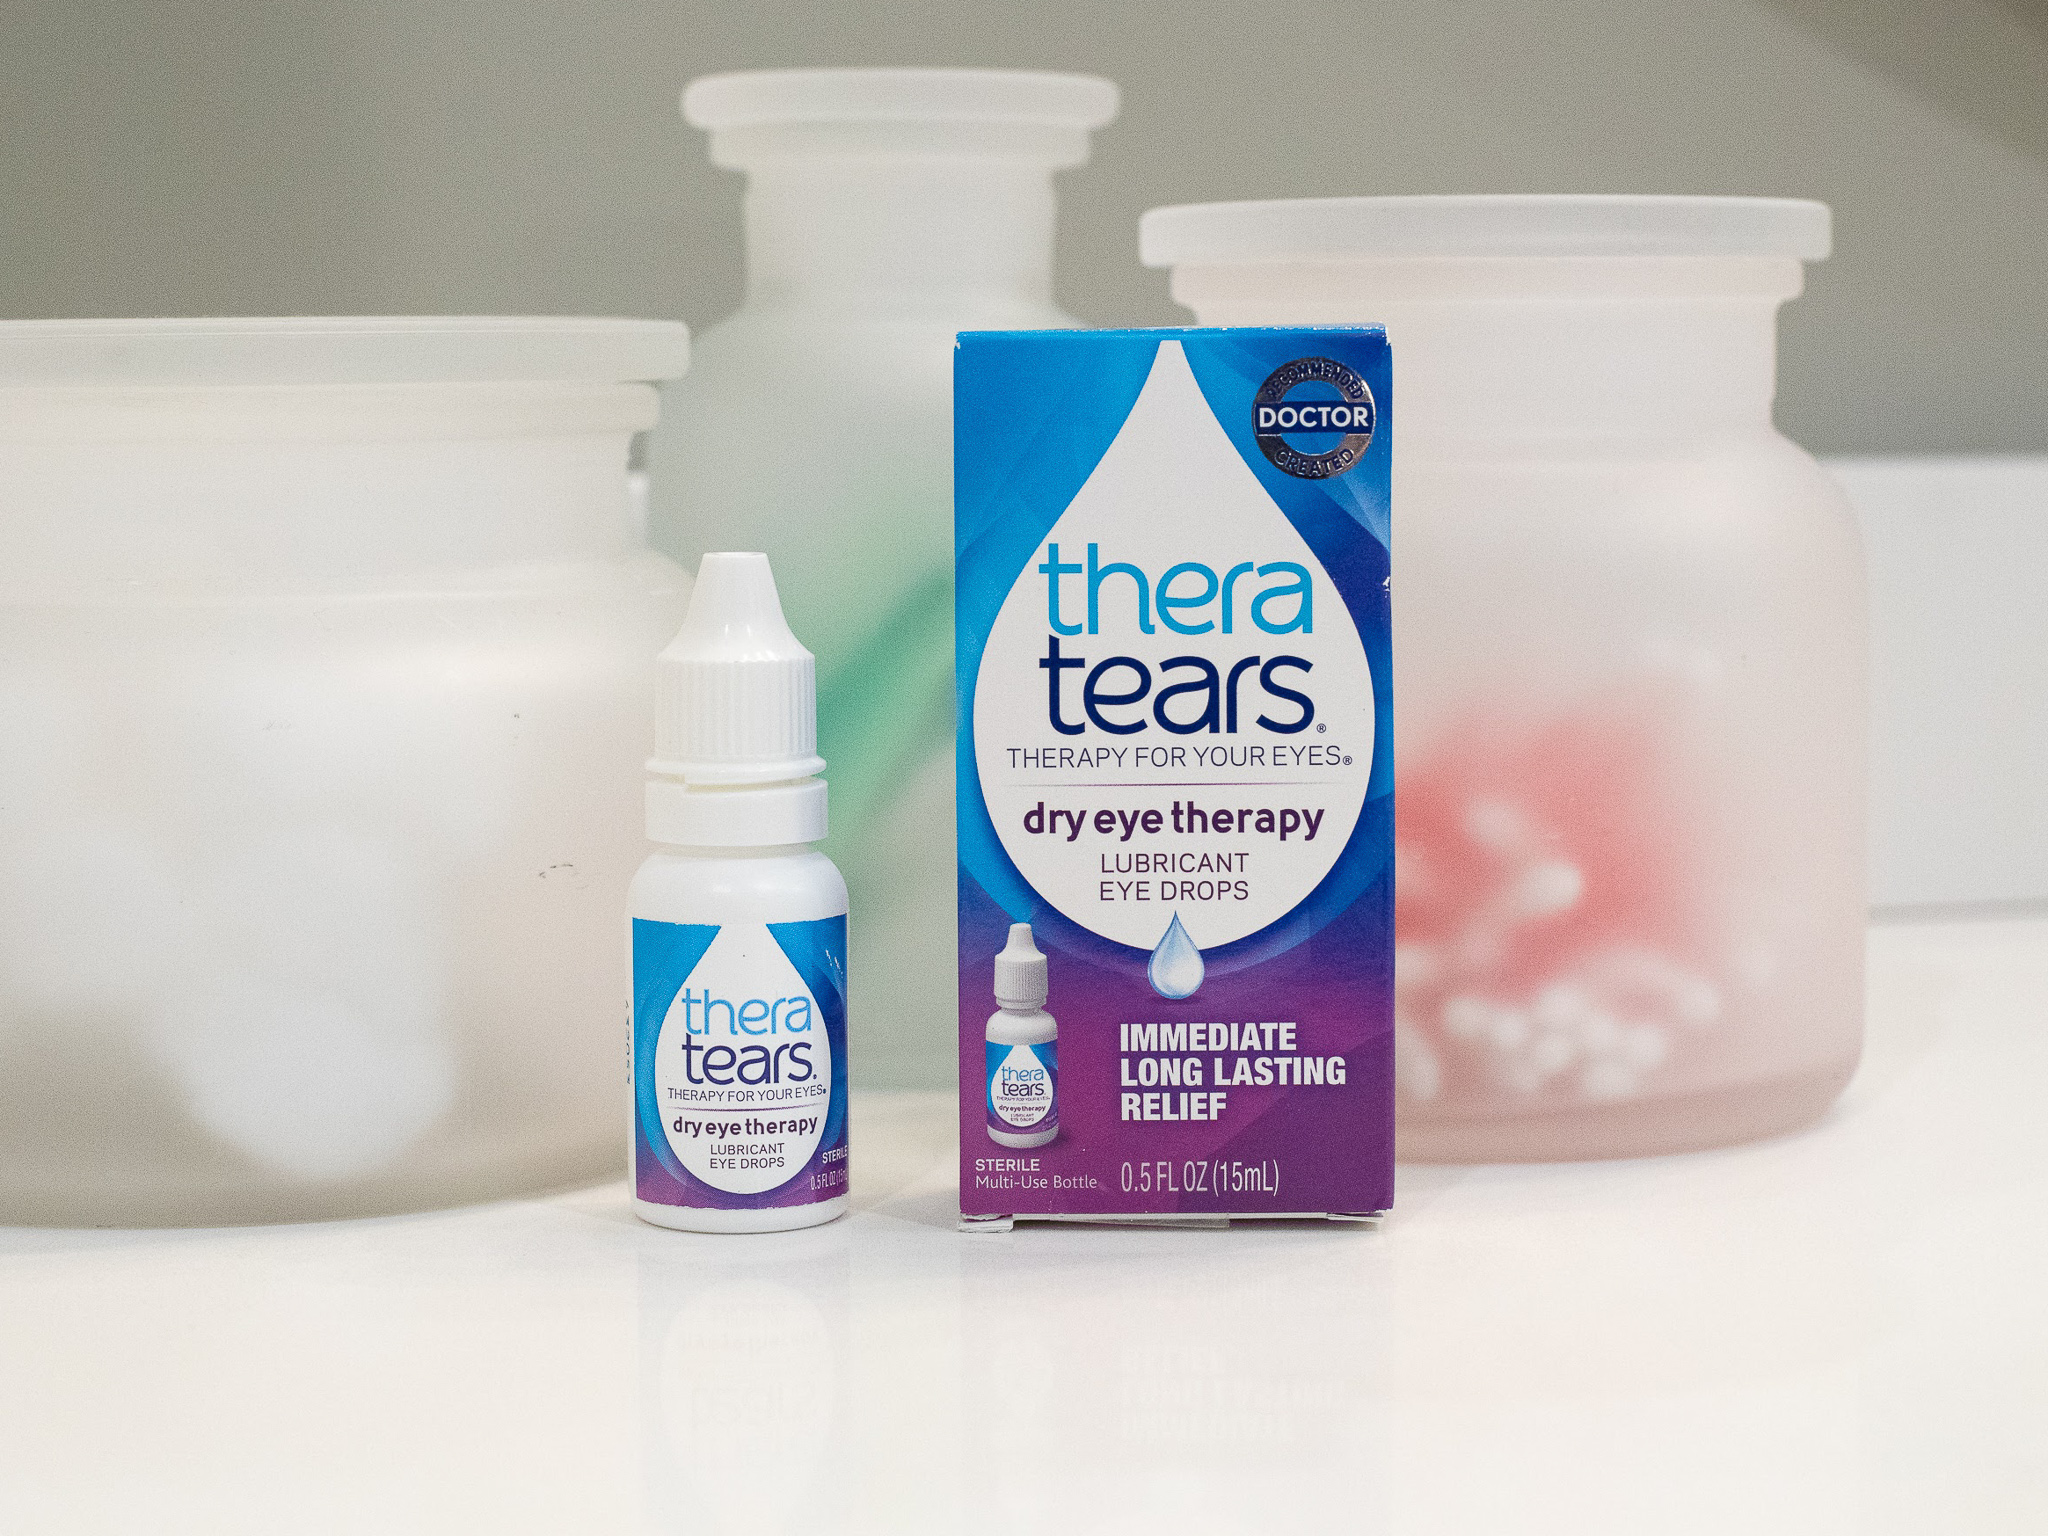 Get Thera Tears For As Low As $4.69 At Publix – Save $6